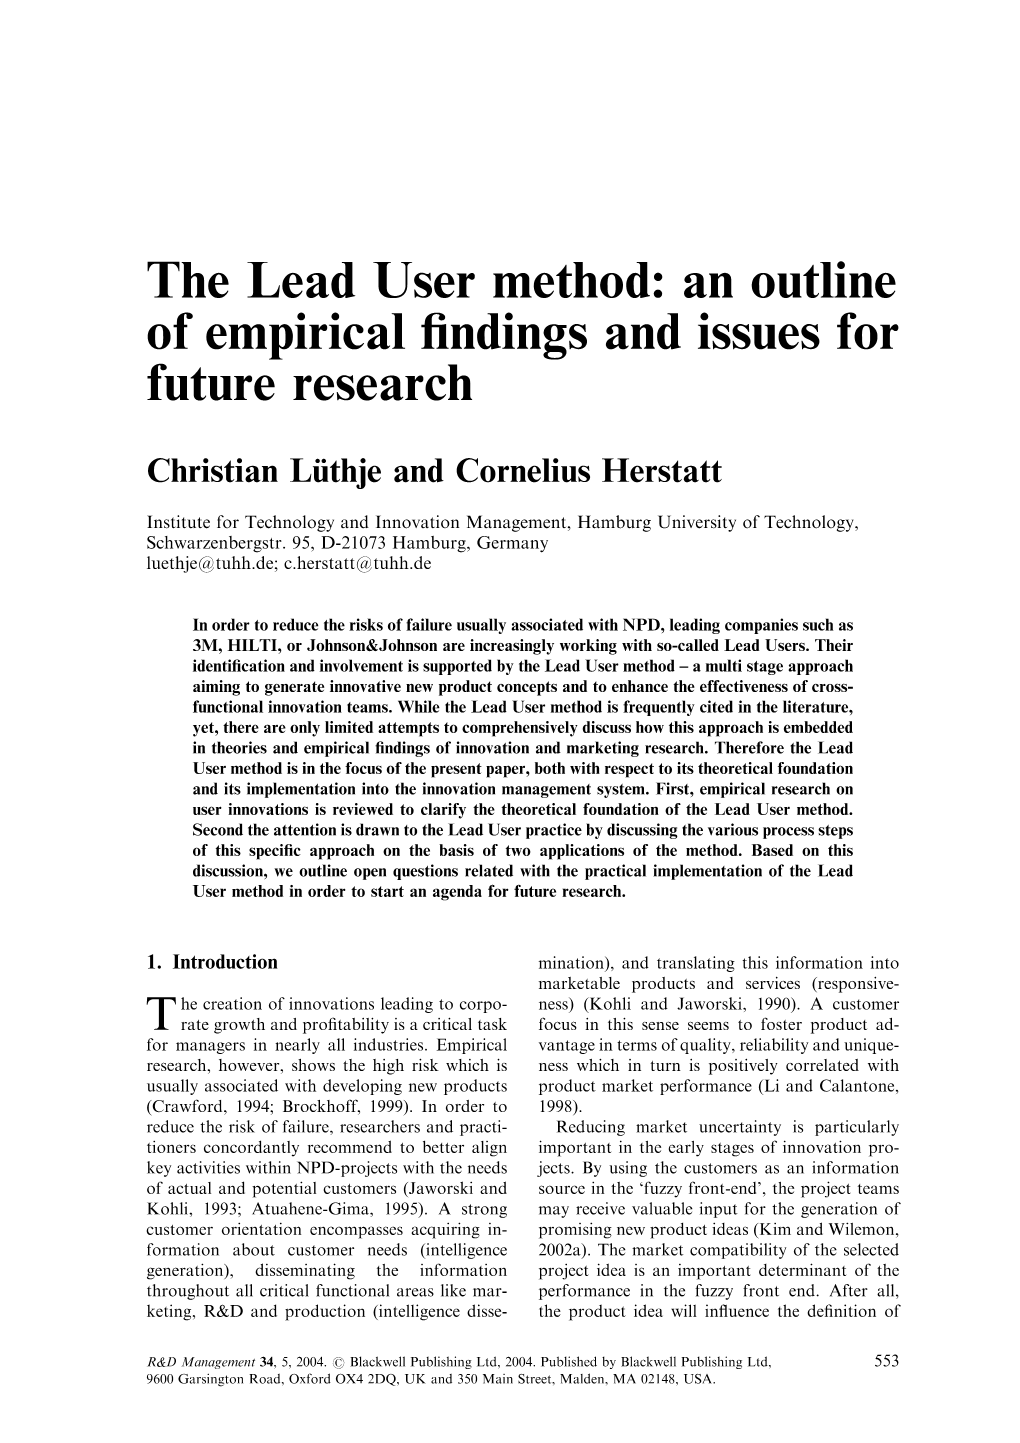 The Lead User Method: an Outline of Empirical Findings and Issues For